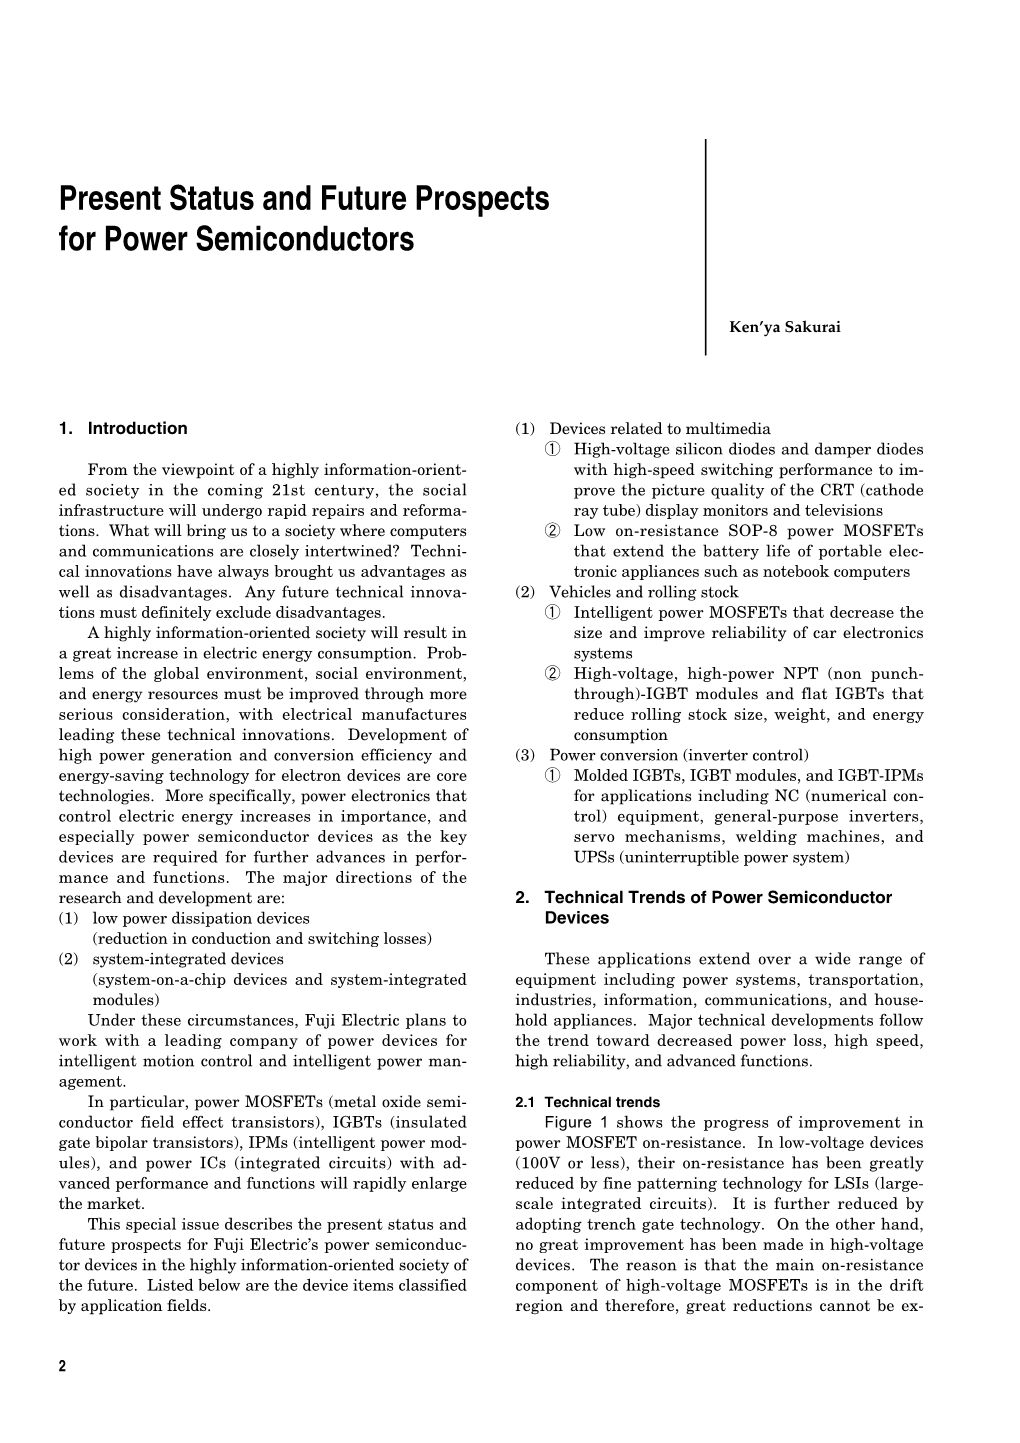 Present Status and Future Prospects for Power Semiconductors